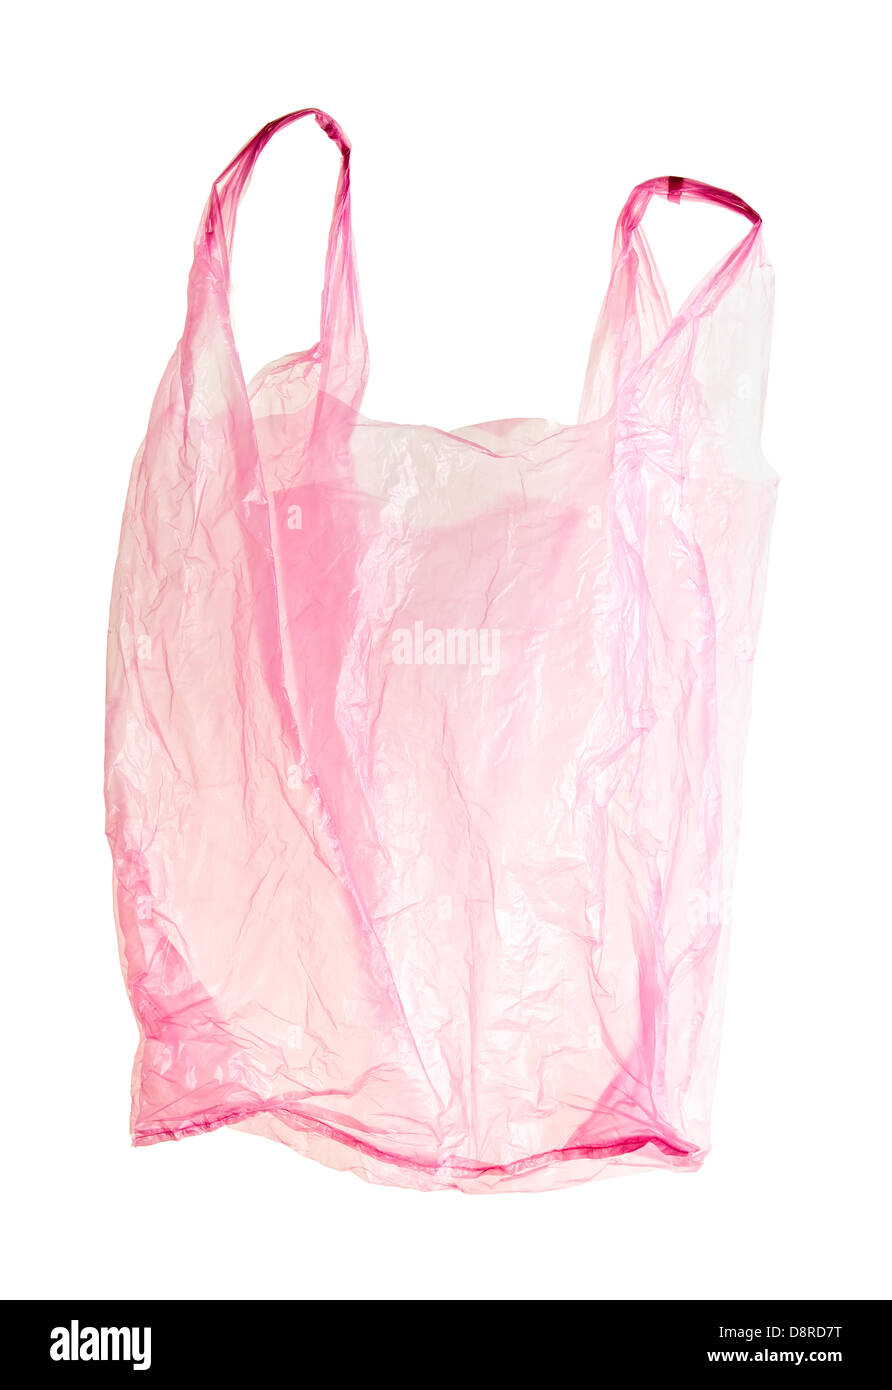 pink plastic bag isolated on white background with clipping path included Stock Photo